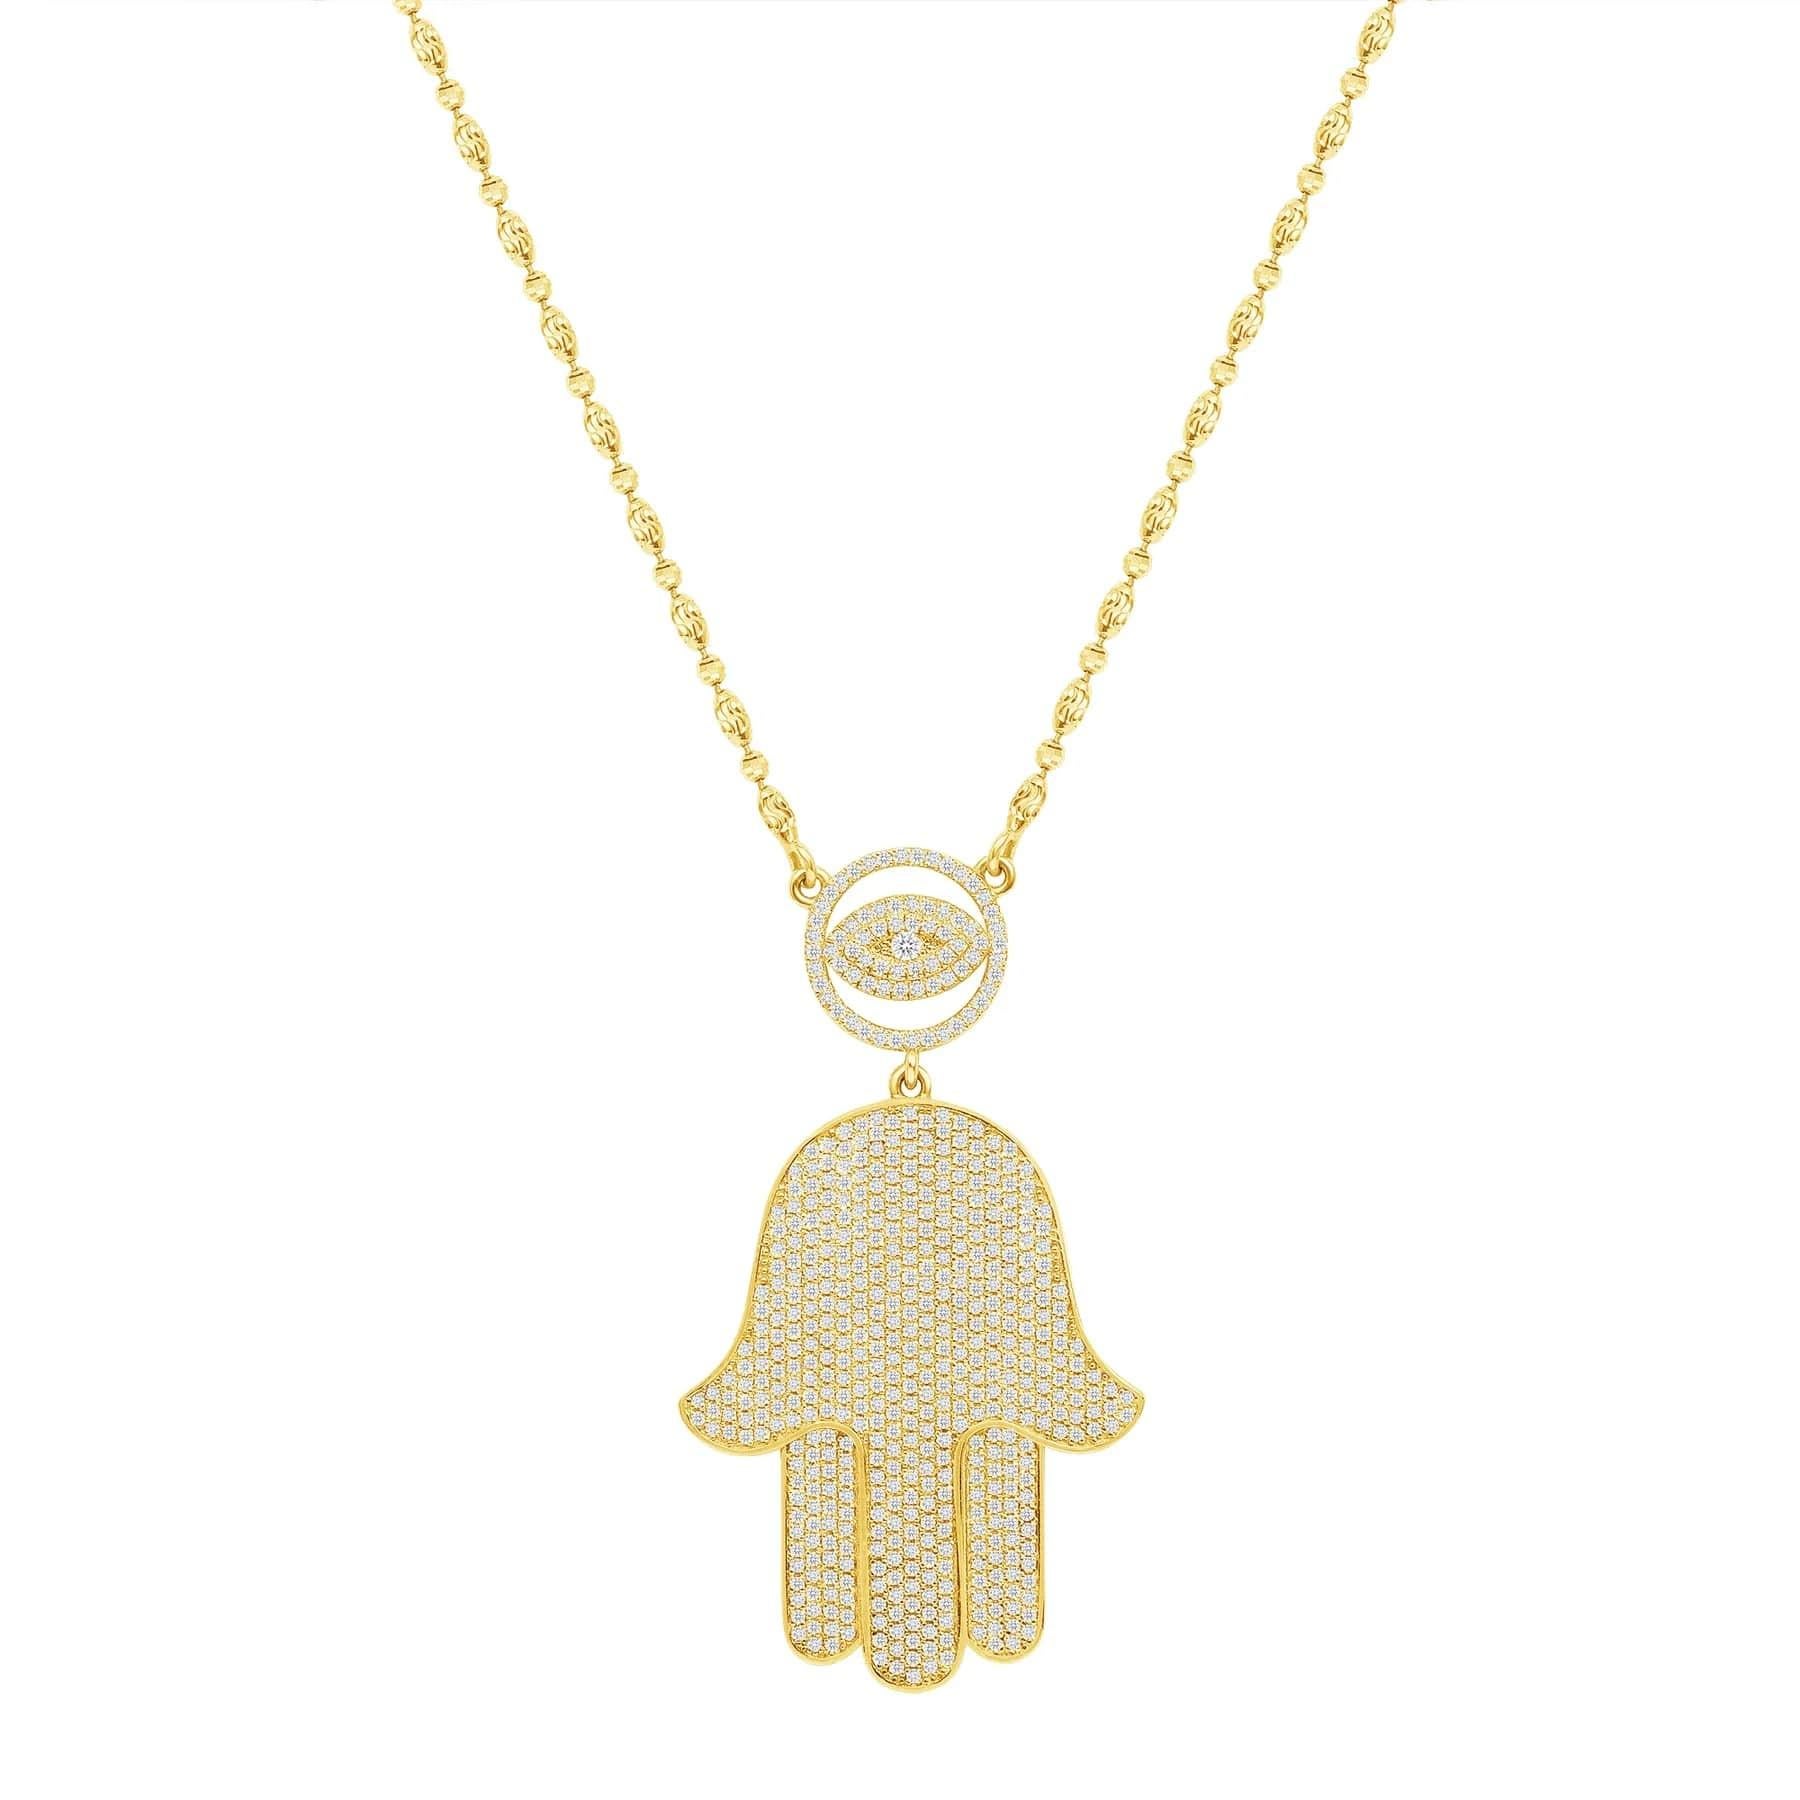 Blake's Diamond Hamsa Eye Necklace In New Condition For Sale In Los Angeles, CA